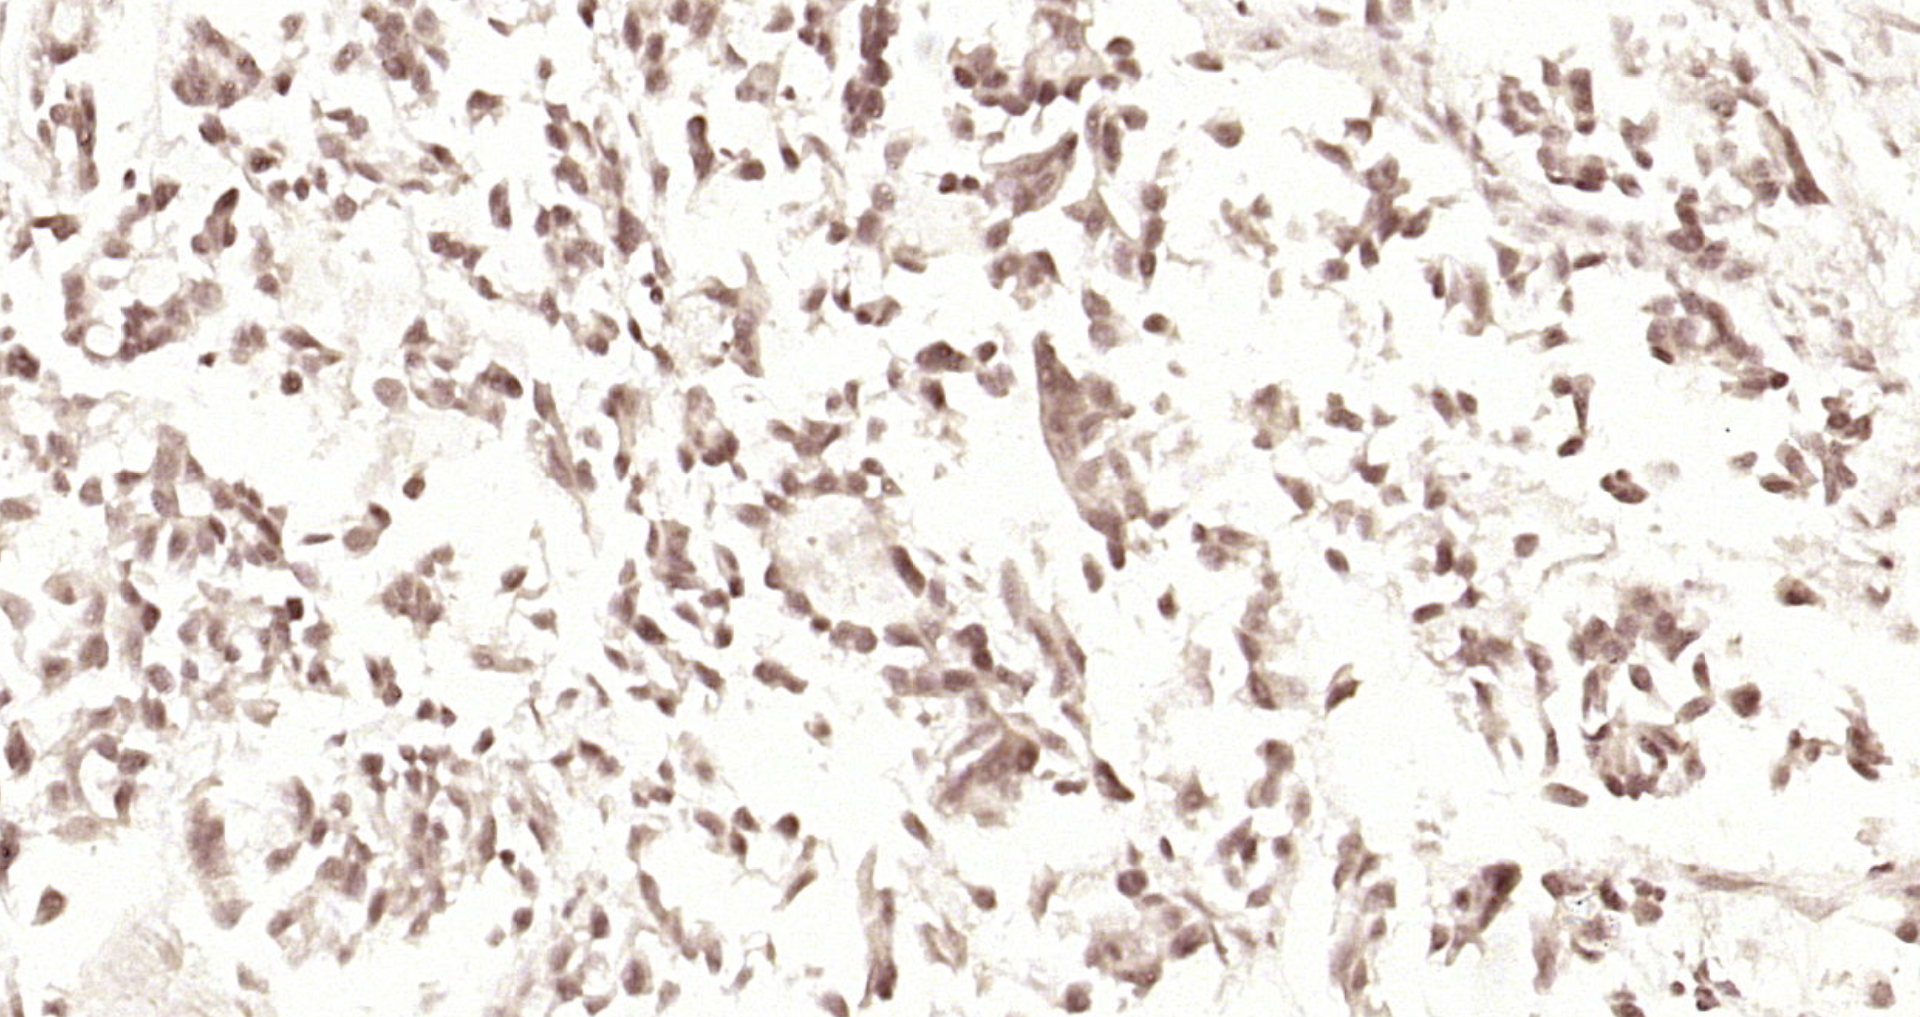 Paraformaldehyde-fixed, paraffin embedded Human gastric carcinoma; Antigen retrieval by boiling in sodium citrate buffer (pH6.0) for 15min; Block endogenous peroxidase by 3% hydrogen peroxide for 20 minutes; Blocking buffer (normal goat serum) at 37°C for 30min; Antibody incubation with RPL5 Polyclonal Antibody, Unconjugated (bs-6573R) at 1:200 overnight at 4°C, DAB staining.